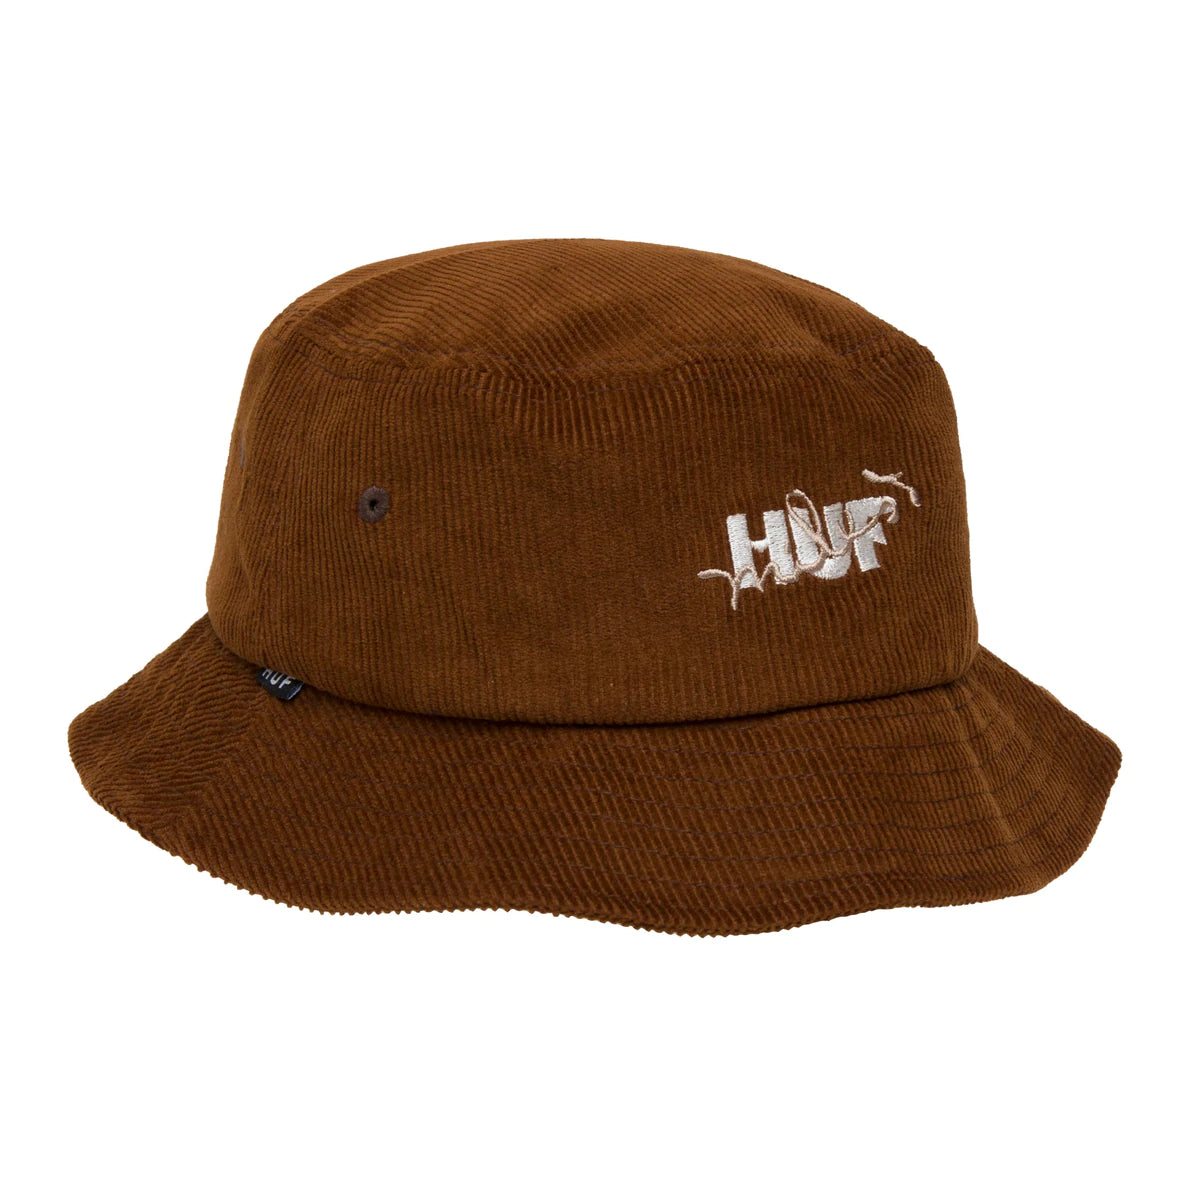 Huf - Get Up With It Cord Bucket Hat